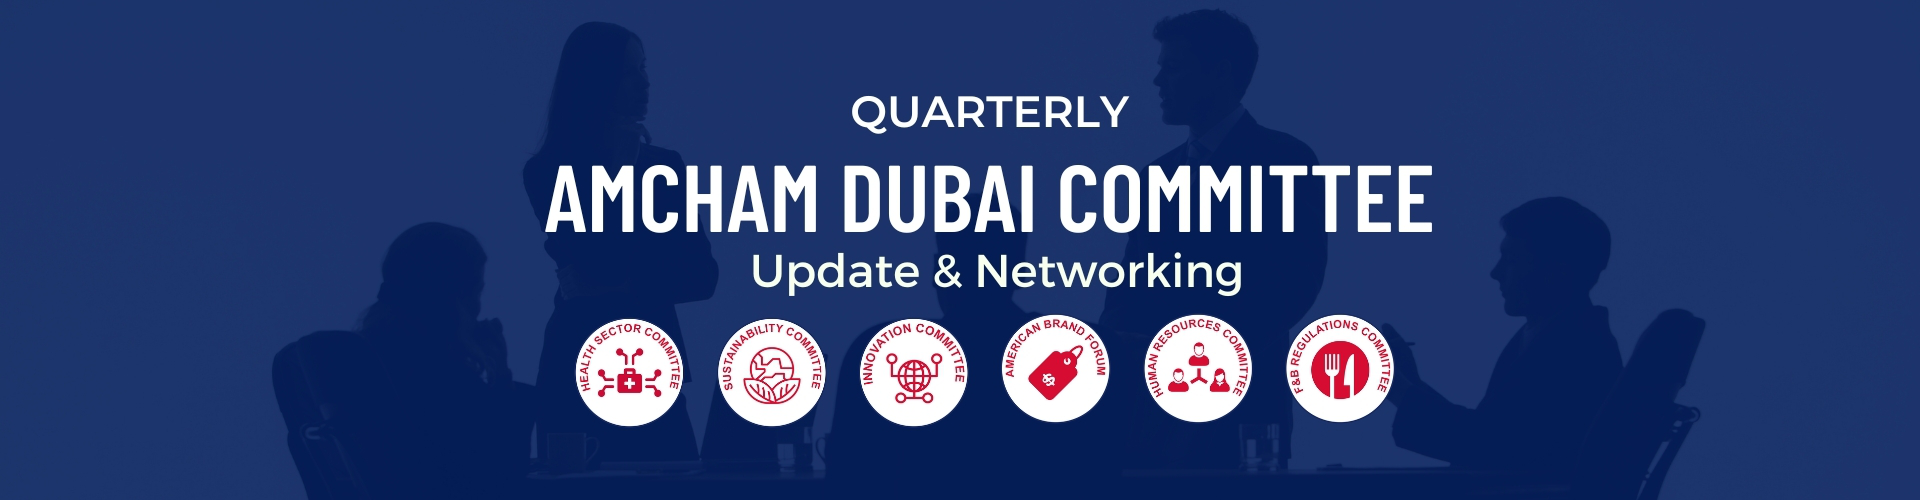 thumbnails Discover How AmCham Dubai is Working for You- Join us for Committee Highlights & Networking